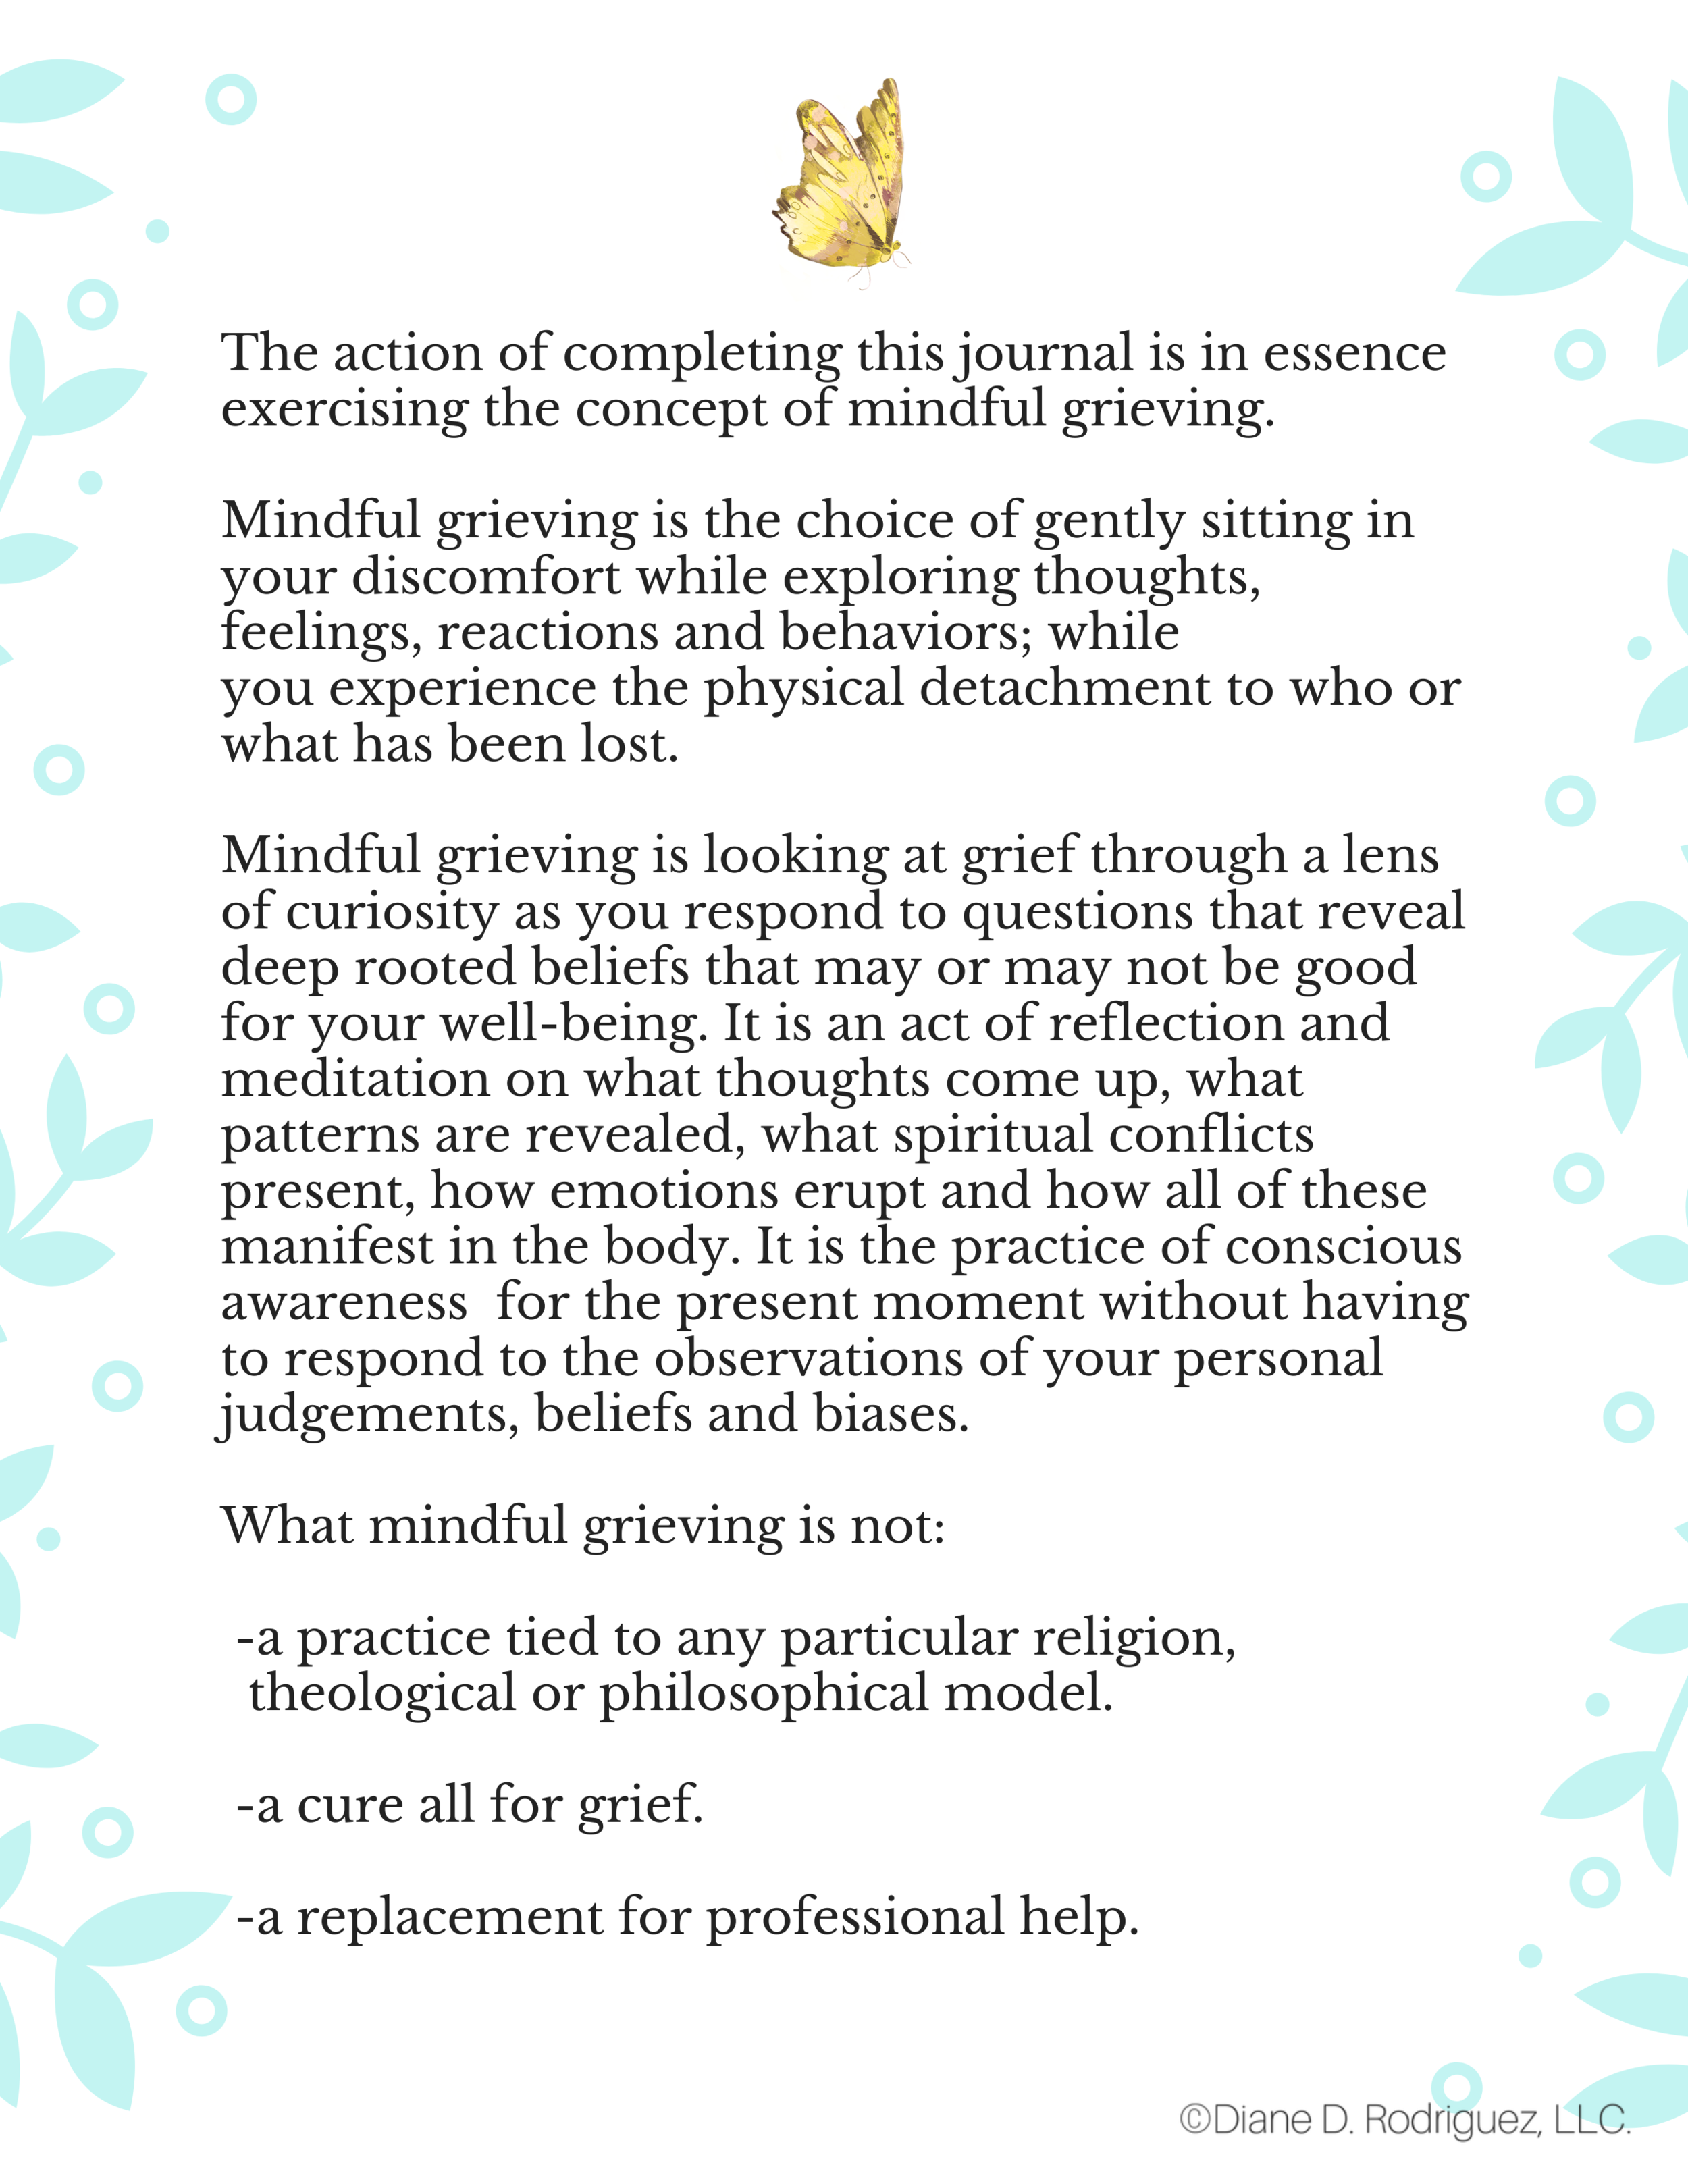 Mindful grieving page.png